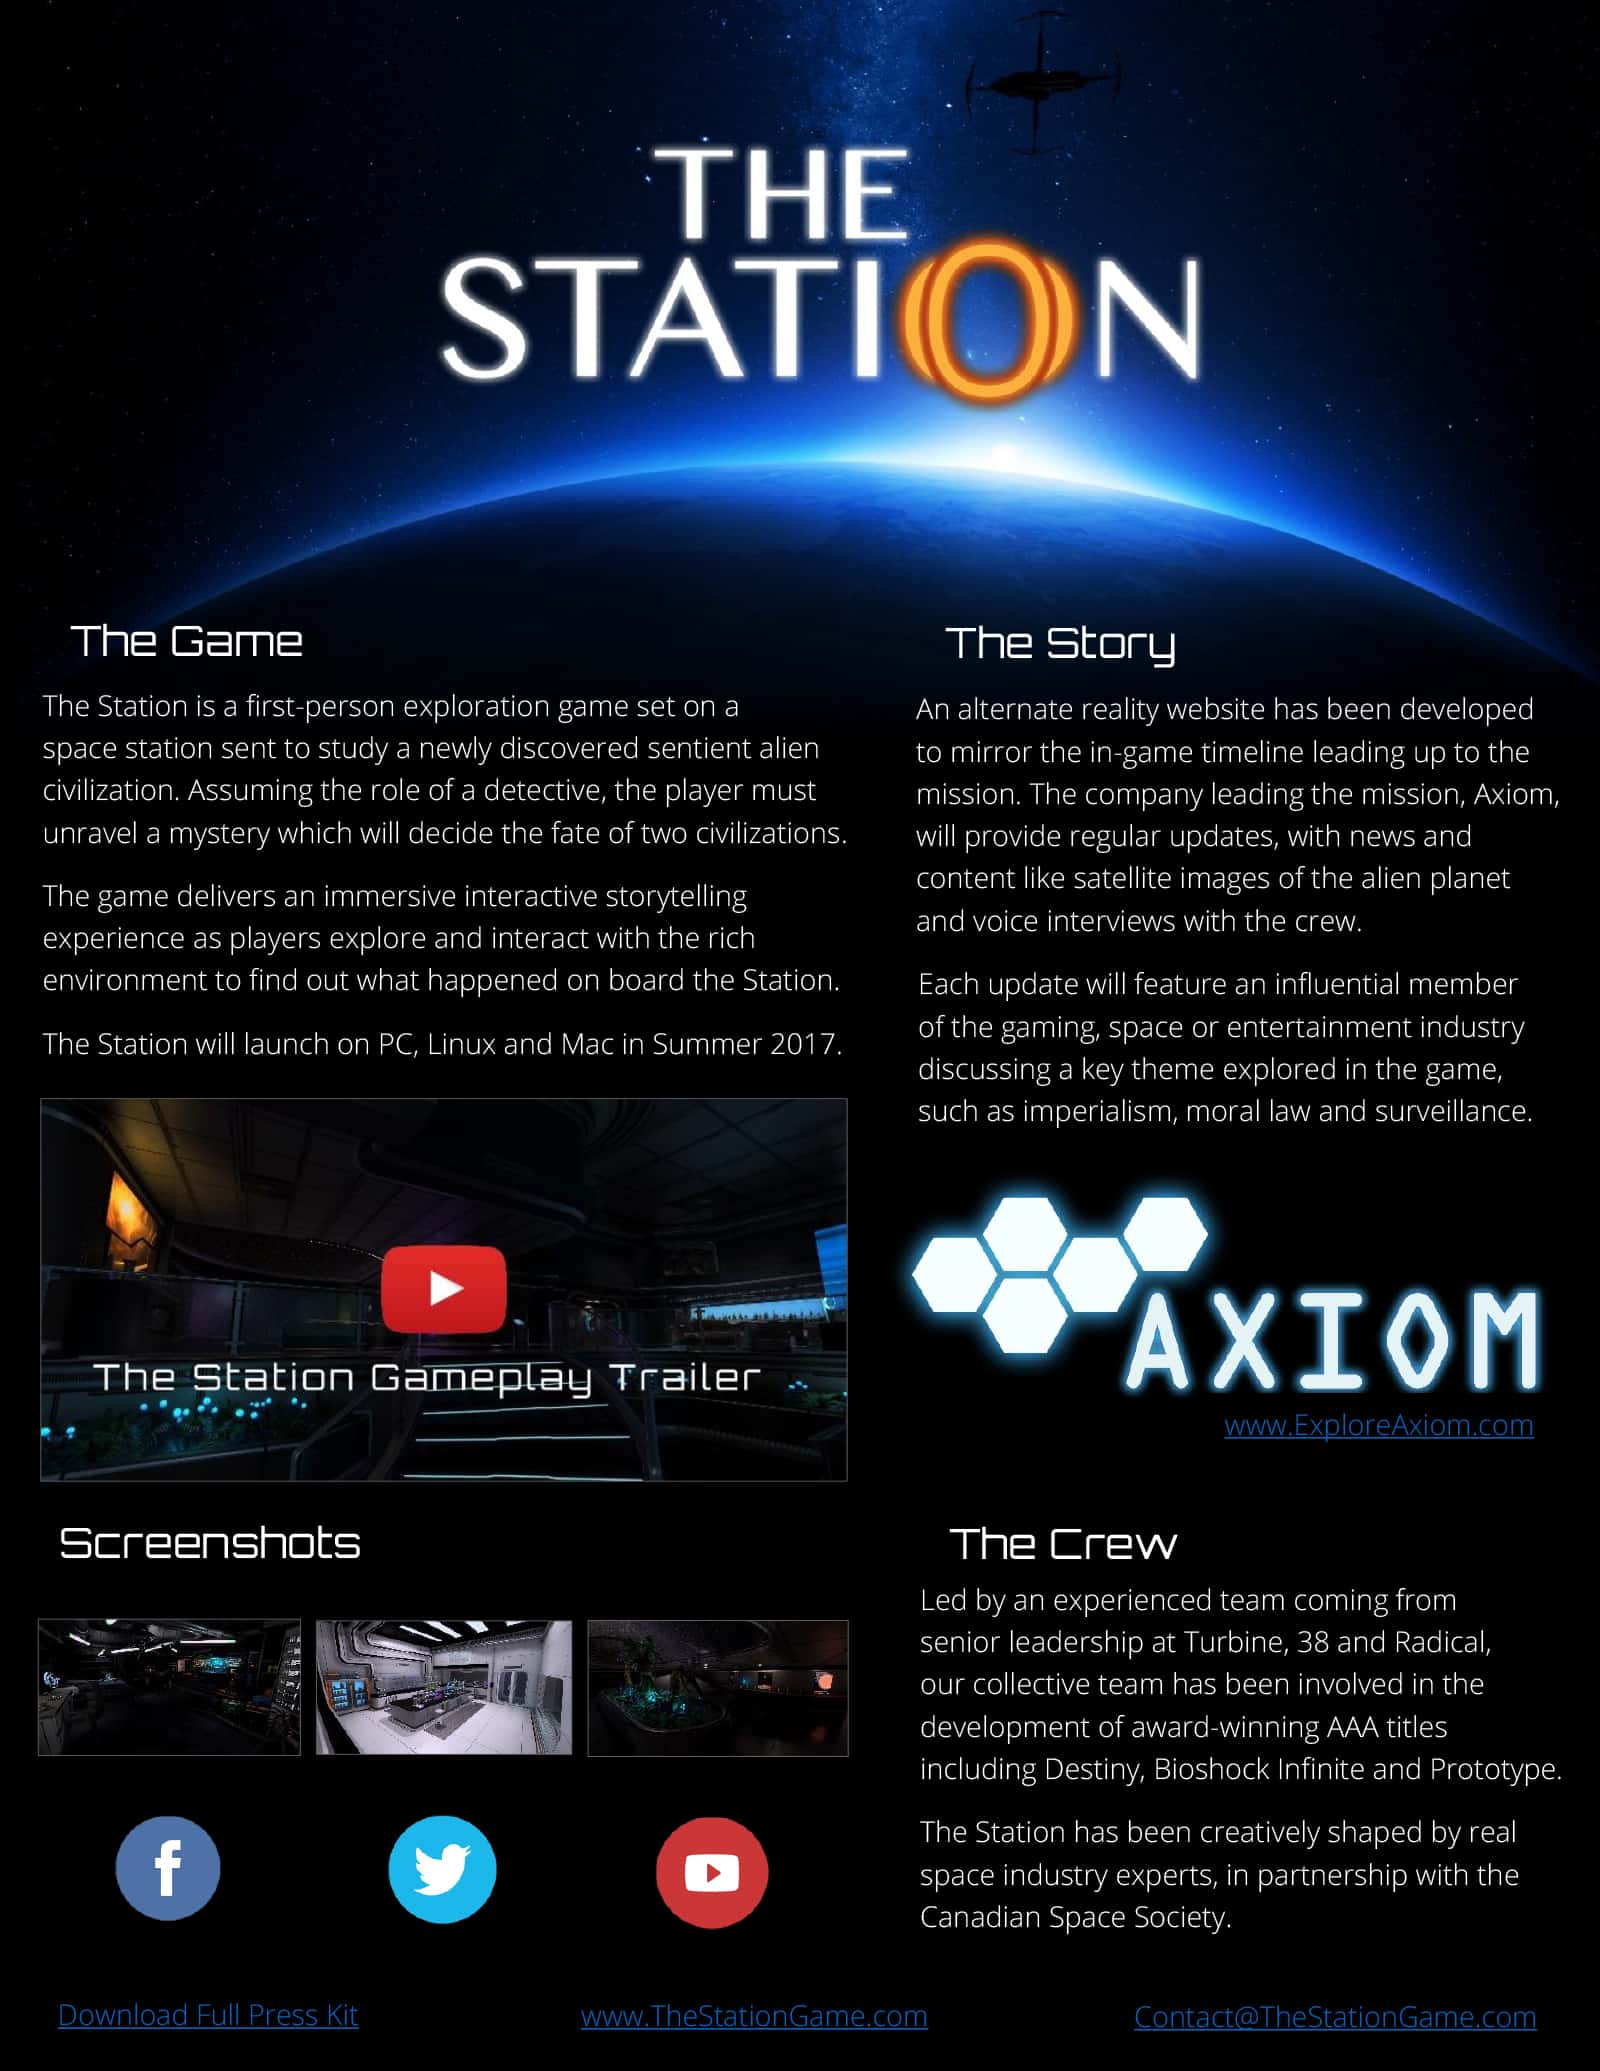 The Station Fact Sheet